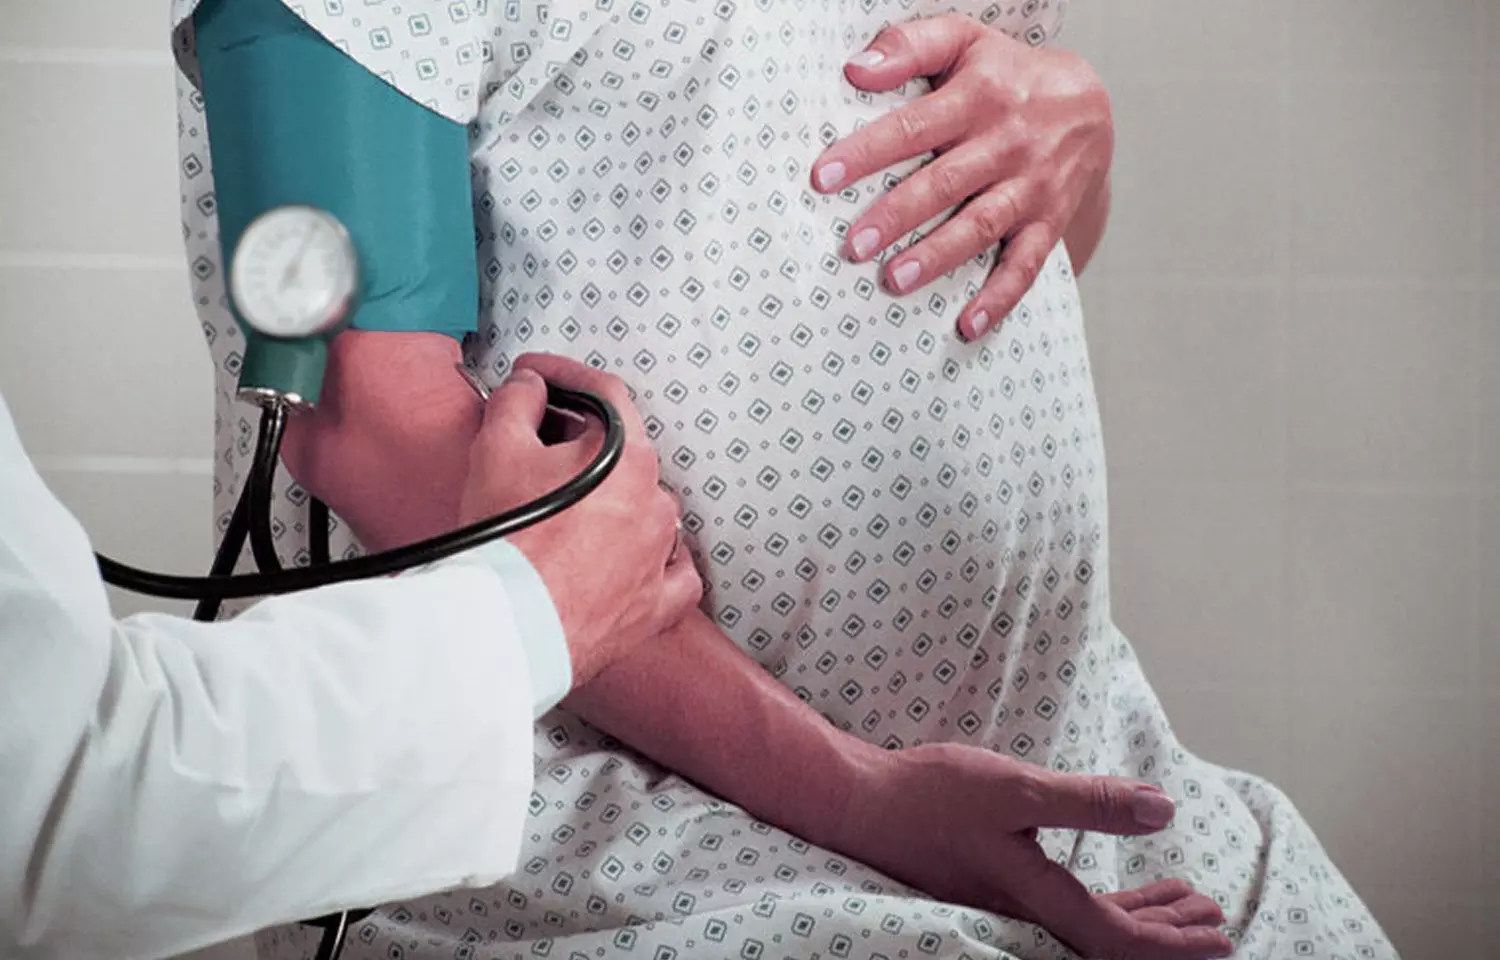 High blood pressure treatment in pregnancy is safe, prevents maternal heart risks